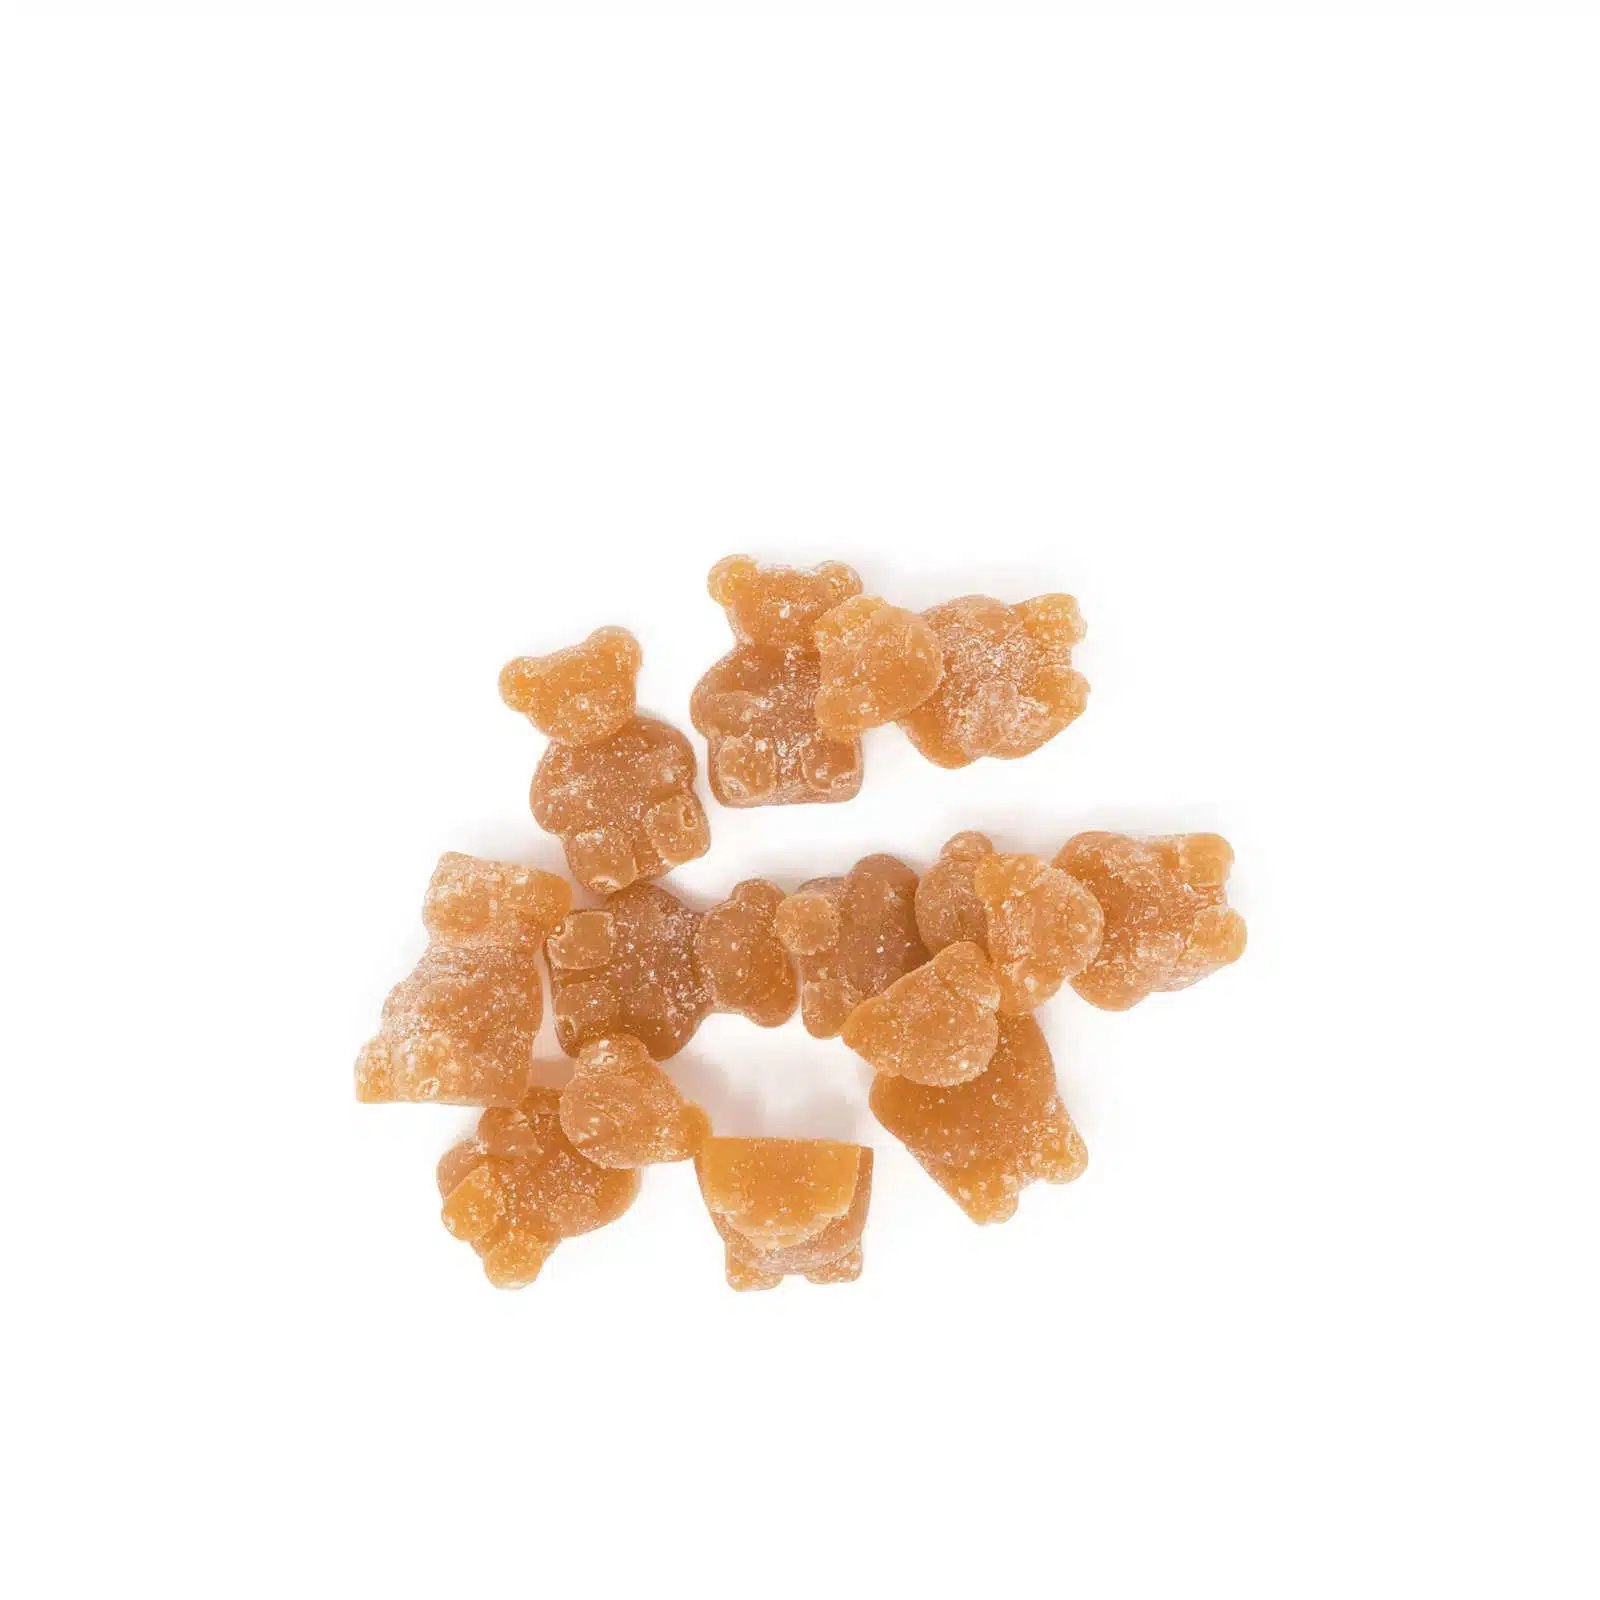 Buudabomb Peach 100mg Available For Delivery - Chillin Cheetah